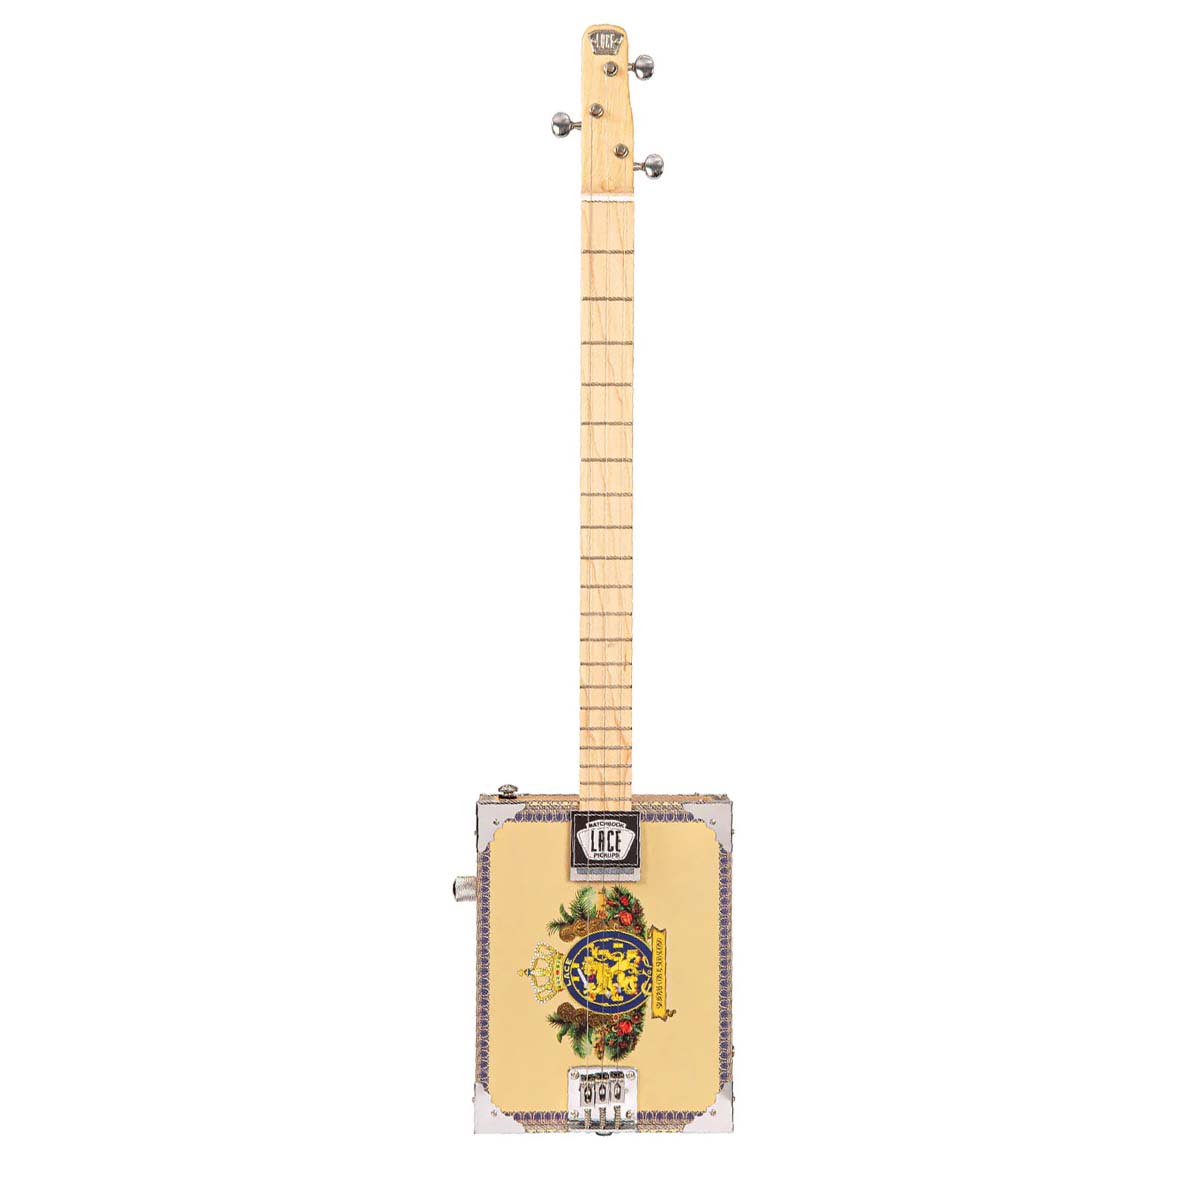 An image of Lace Electric Cigar Box Guitar, Royalty, 3 String